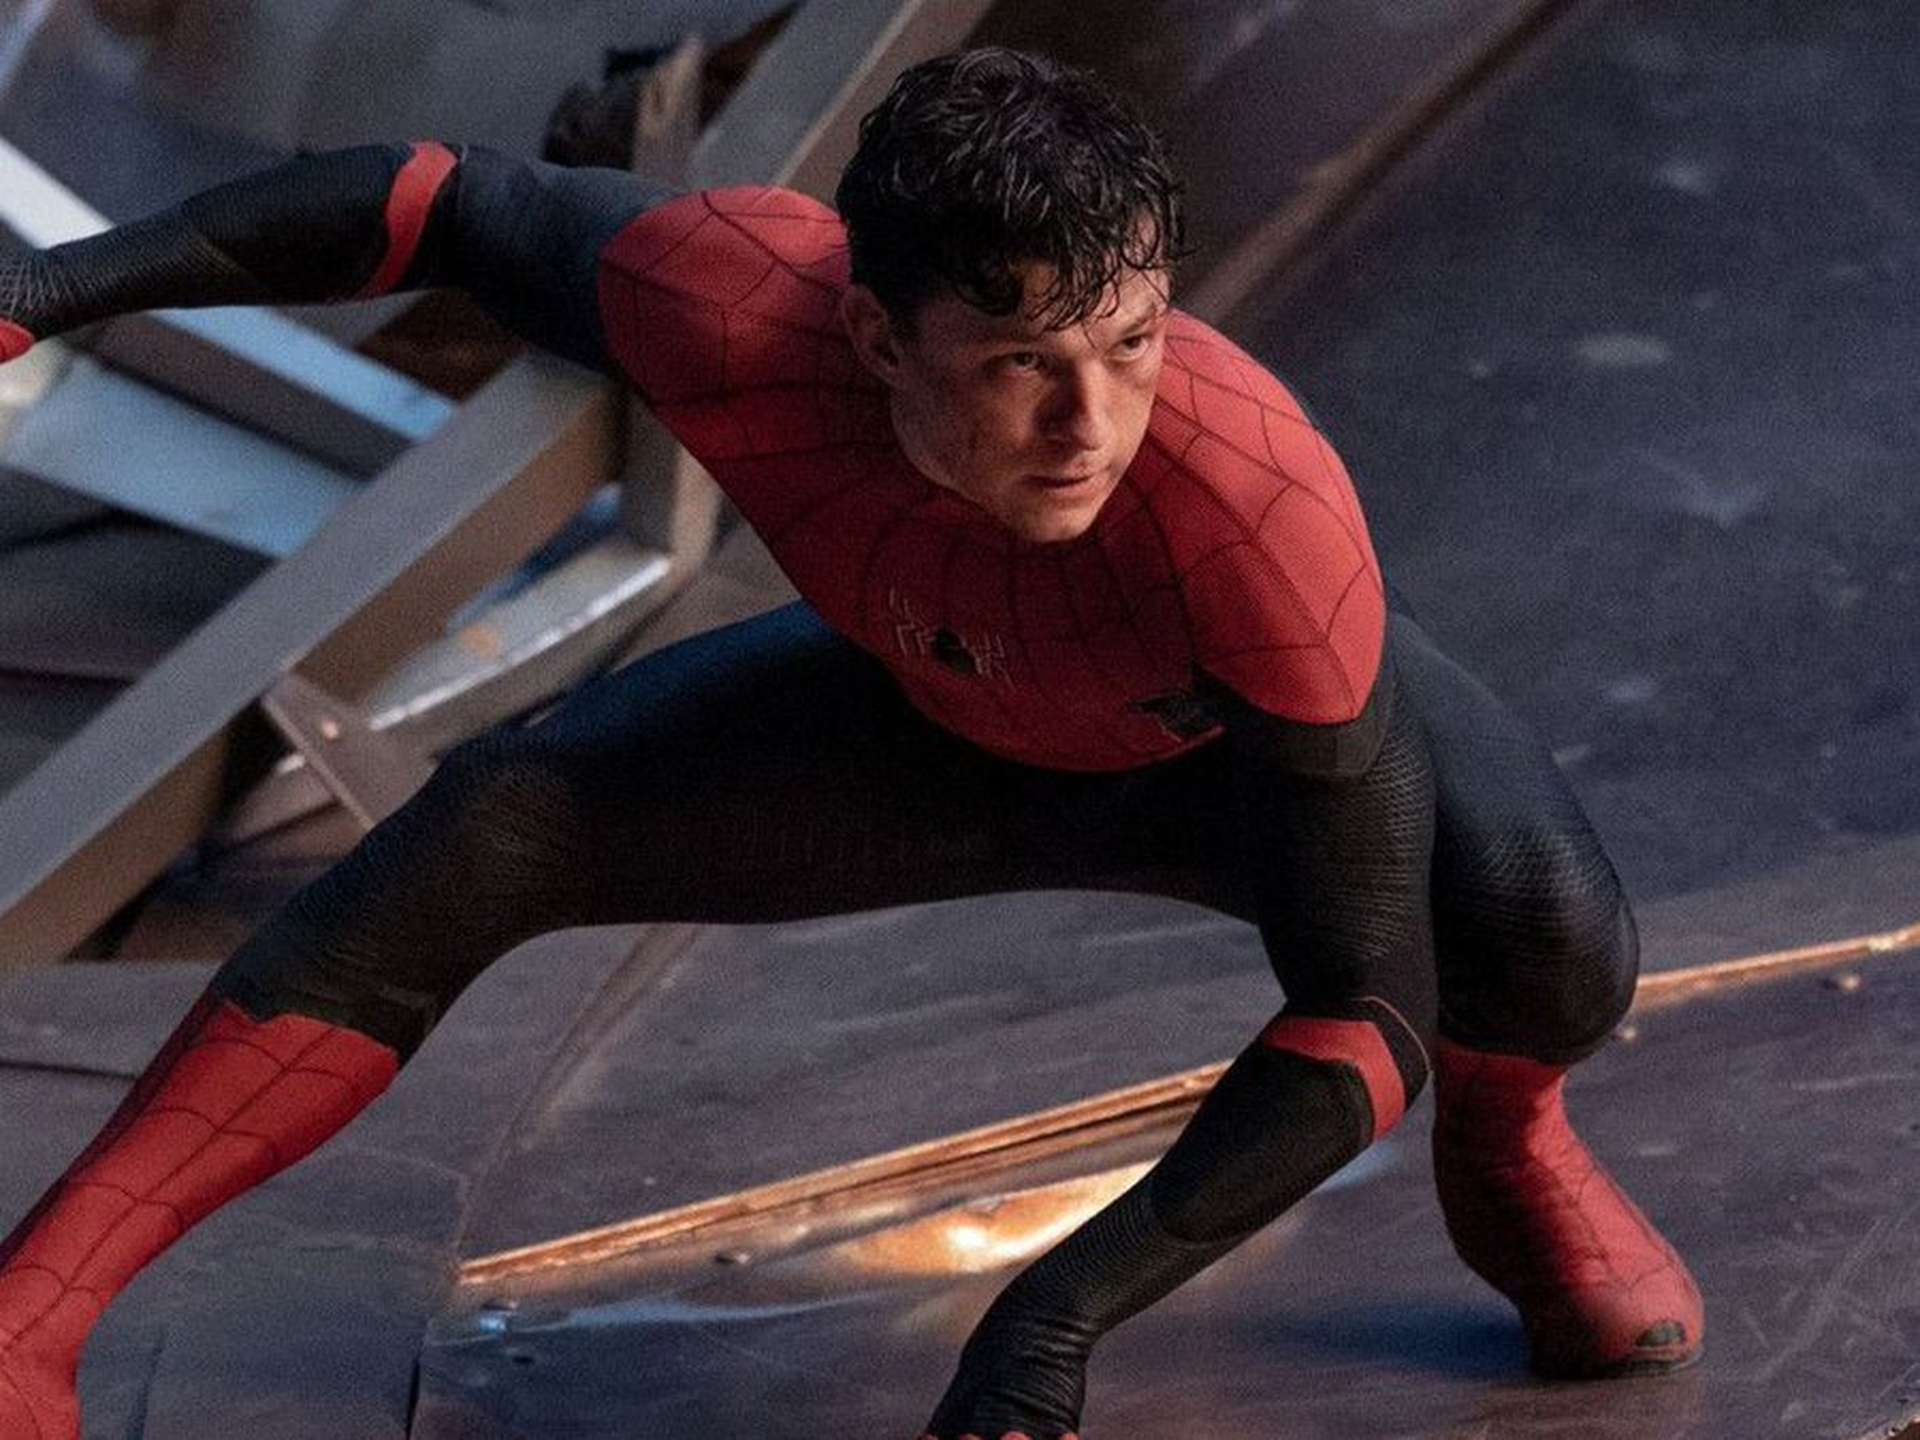 The Spider-Man 4 film from Sony Pictures and Marvel Studios will reportedly see Tom Holland Spider Man contract renewed, allowing him to play Peter Parker...